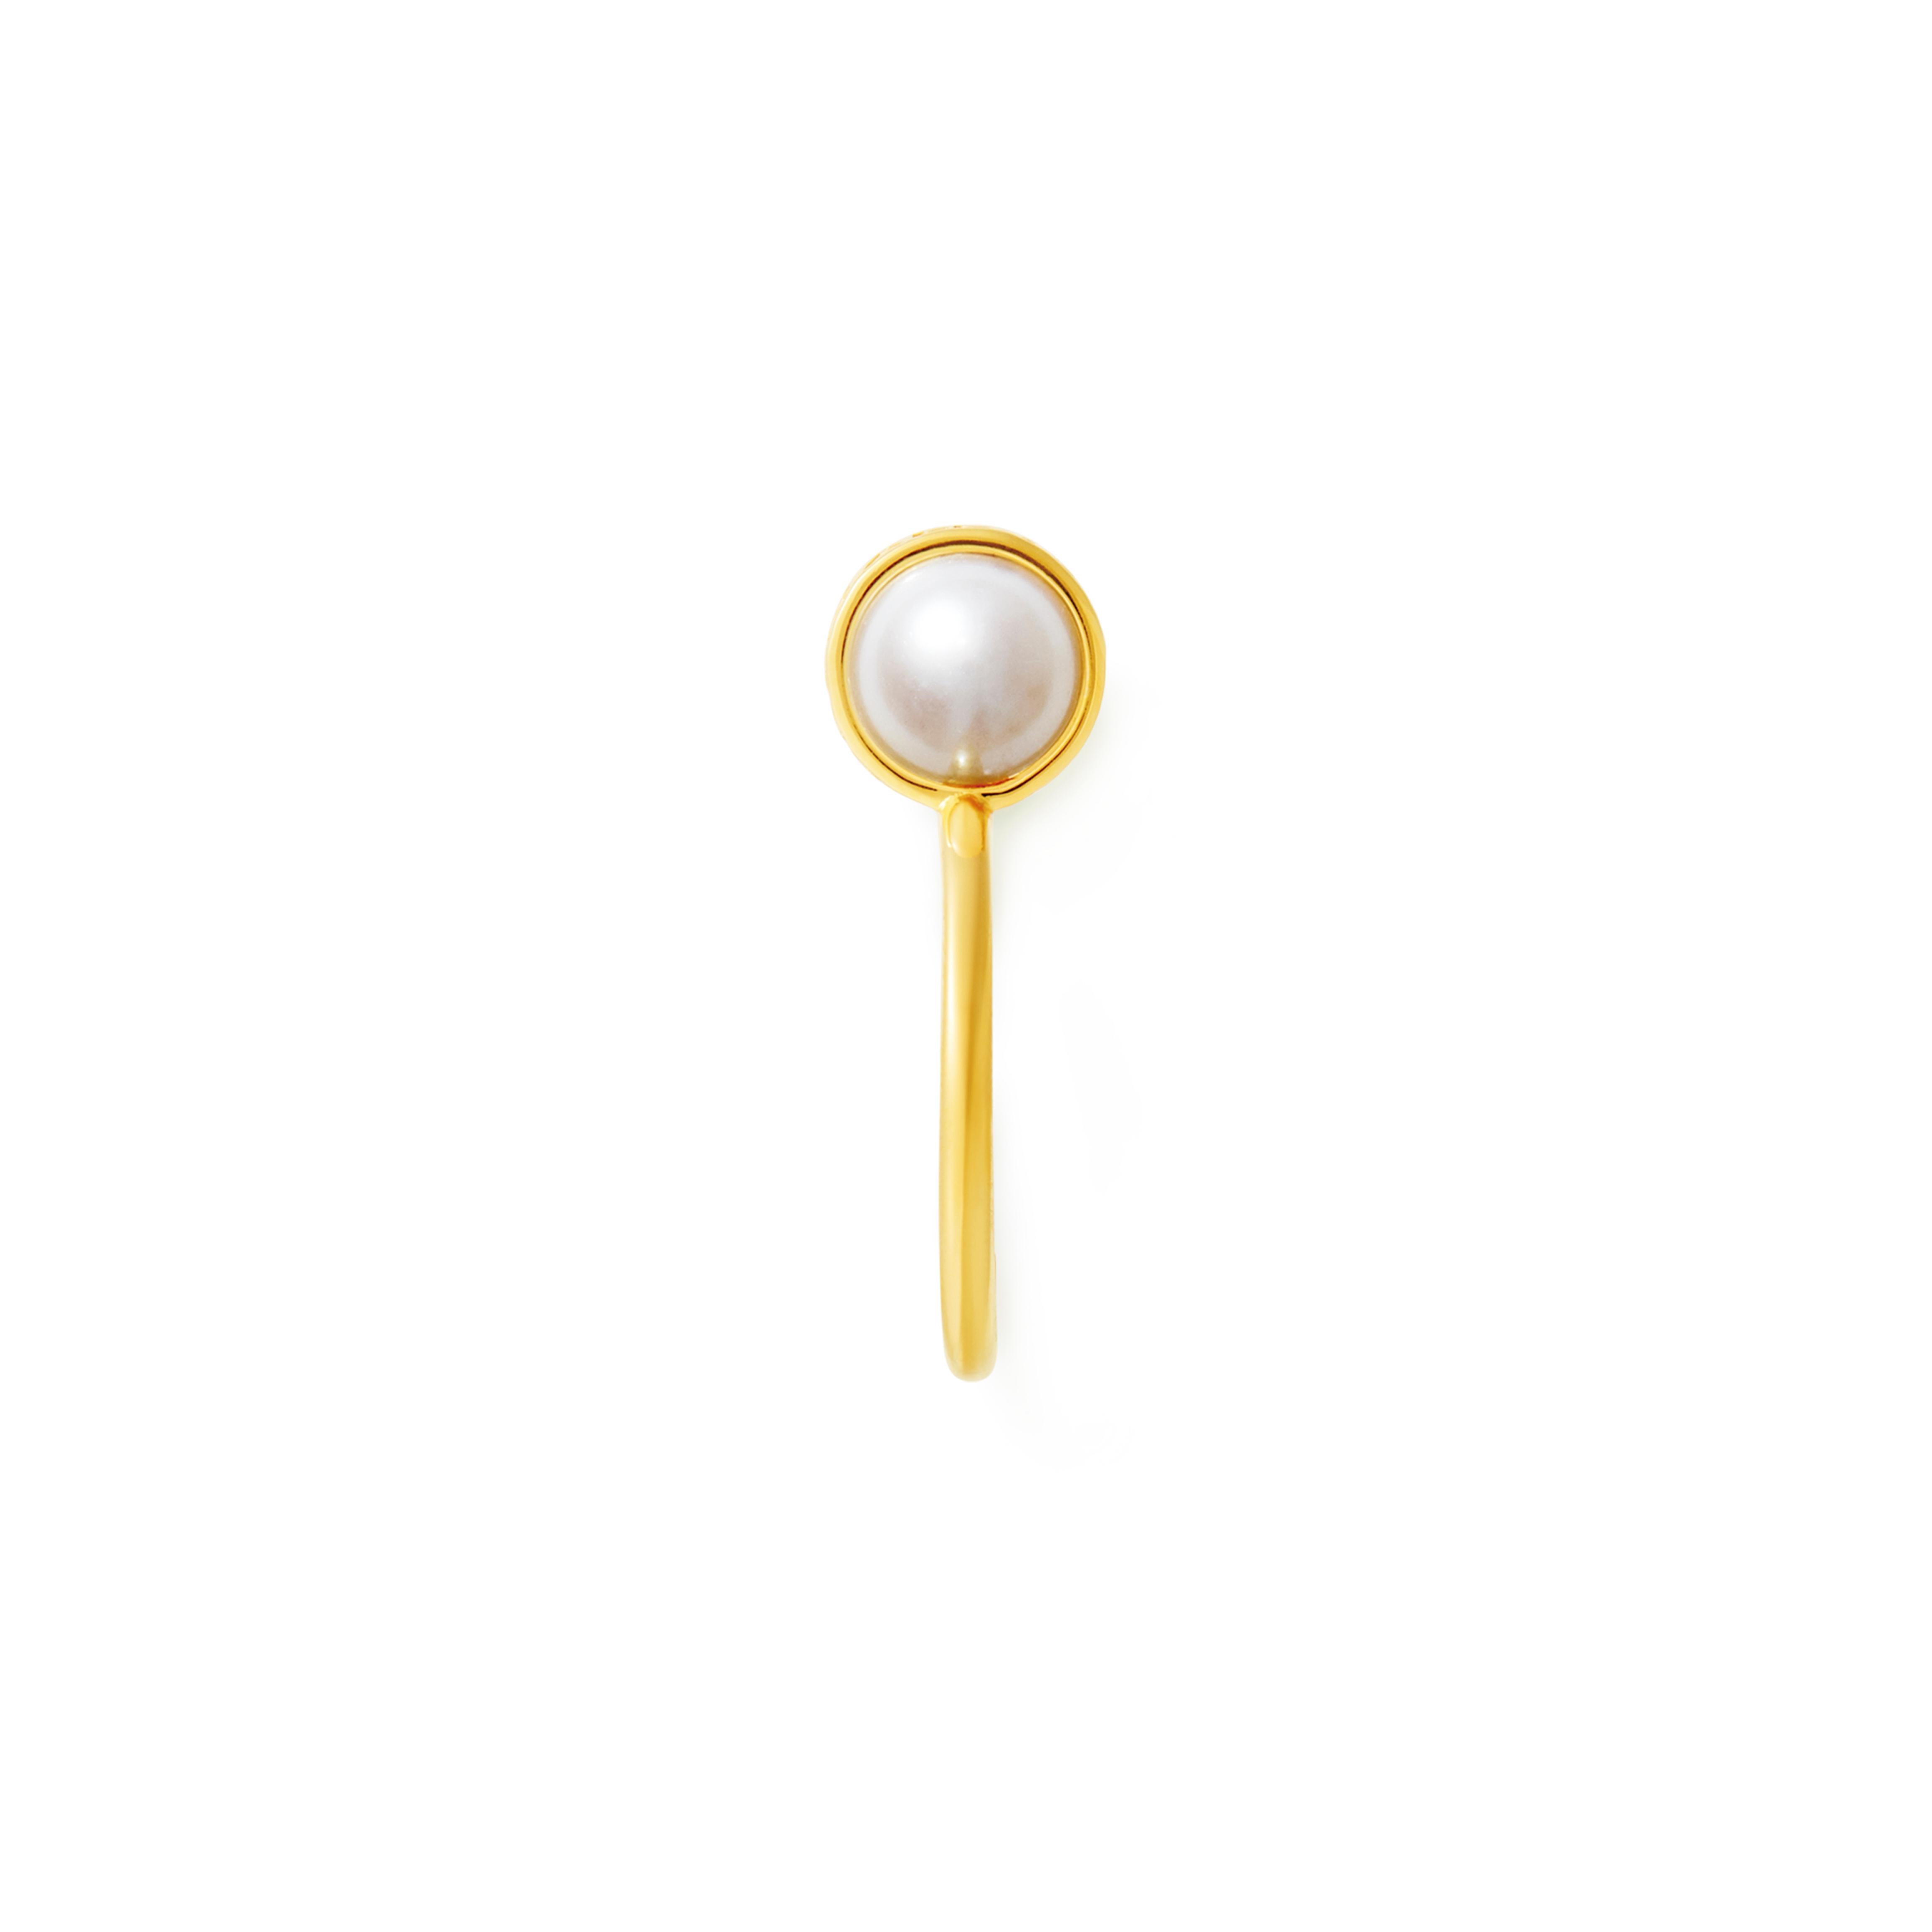 Mistova's Conviction pearl ring is a classic and timeless piece of jewelry. Simplicity and high quality. Several sizes available made from 18K gold.